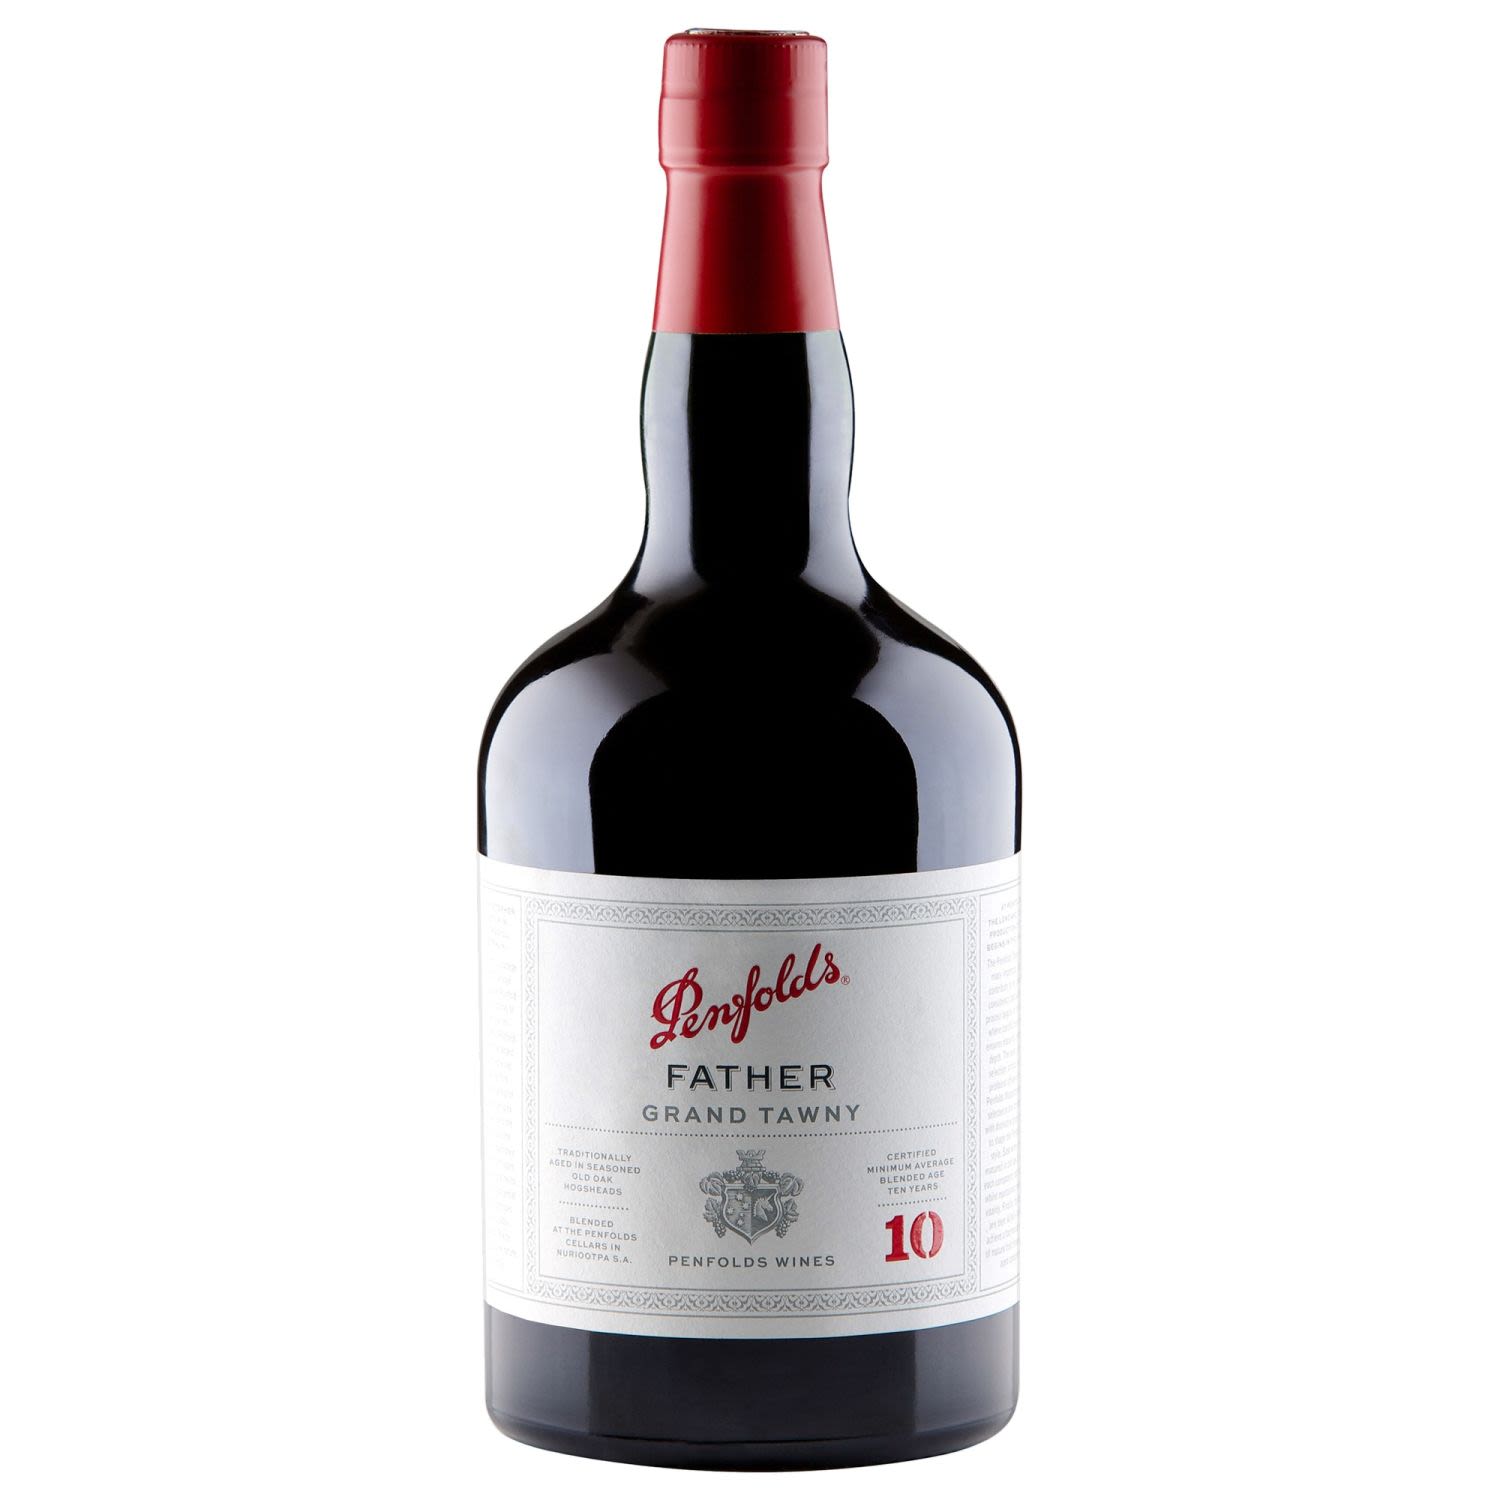 Penfolds Father 10 Year Old Grand Tawny 750mL Bottle